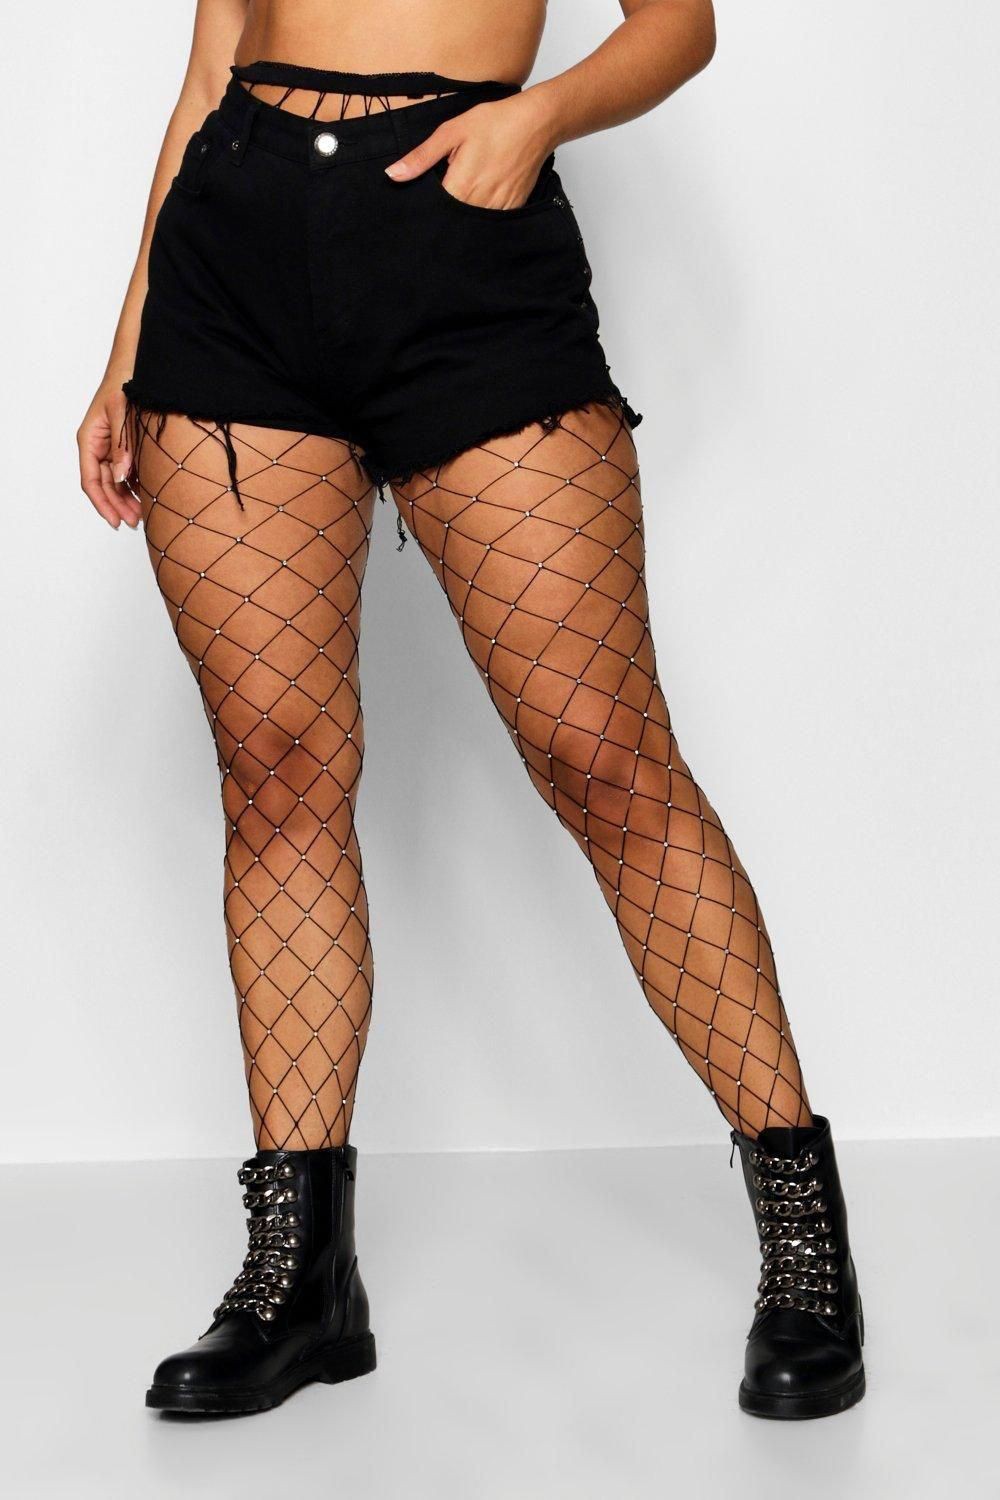 Stylish Fishnet Tight Everyday Outfits For Fall: Ripped Jeans,  Fishnet Leggings Outfit,  Fishnet Tights  